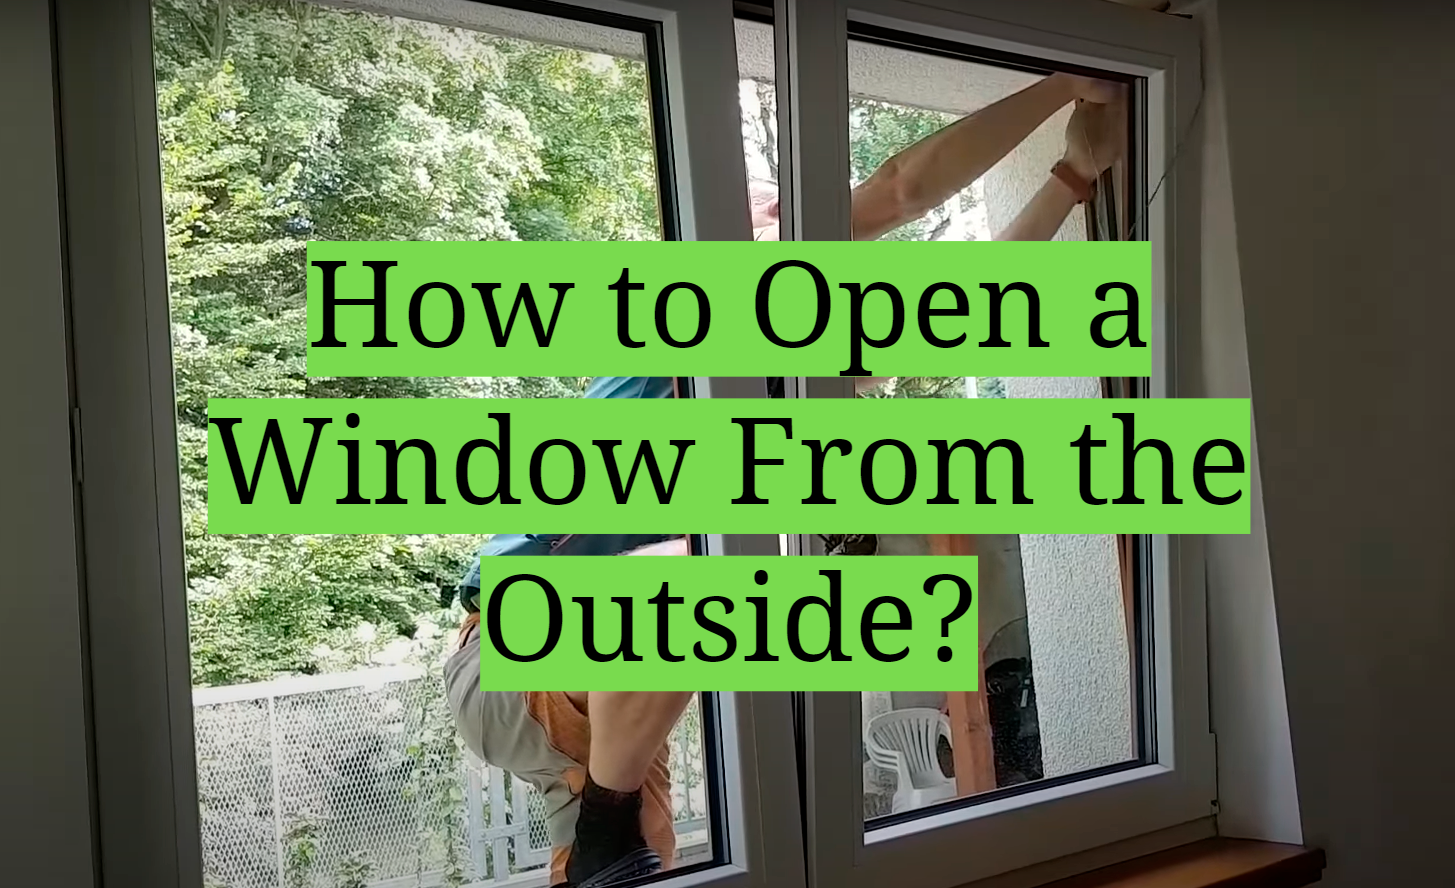 How to Open a Window From the Outside?